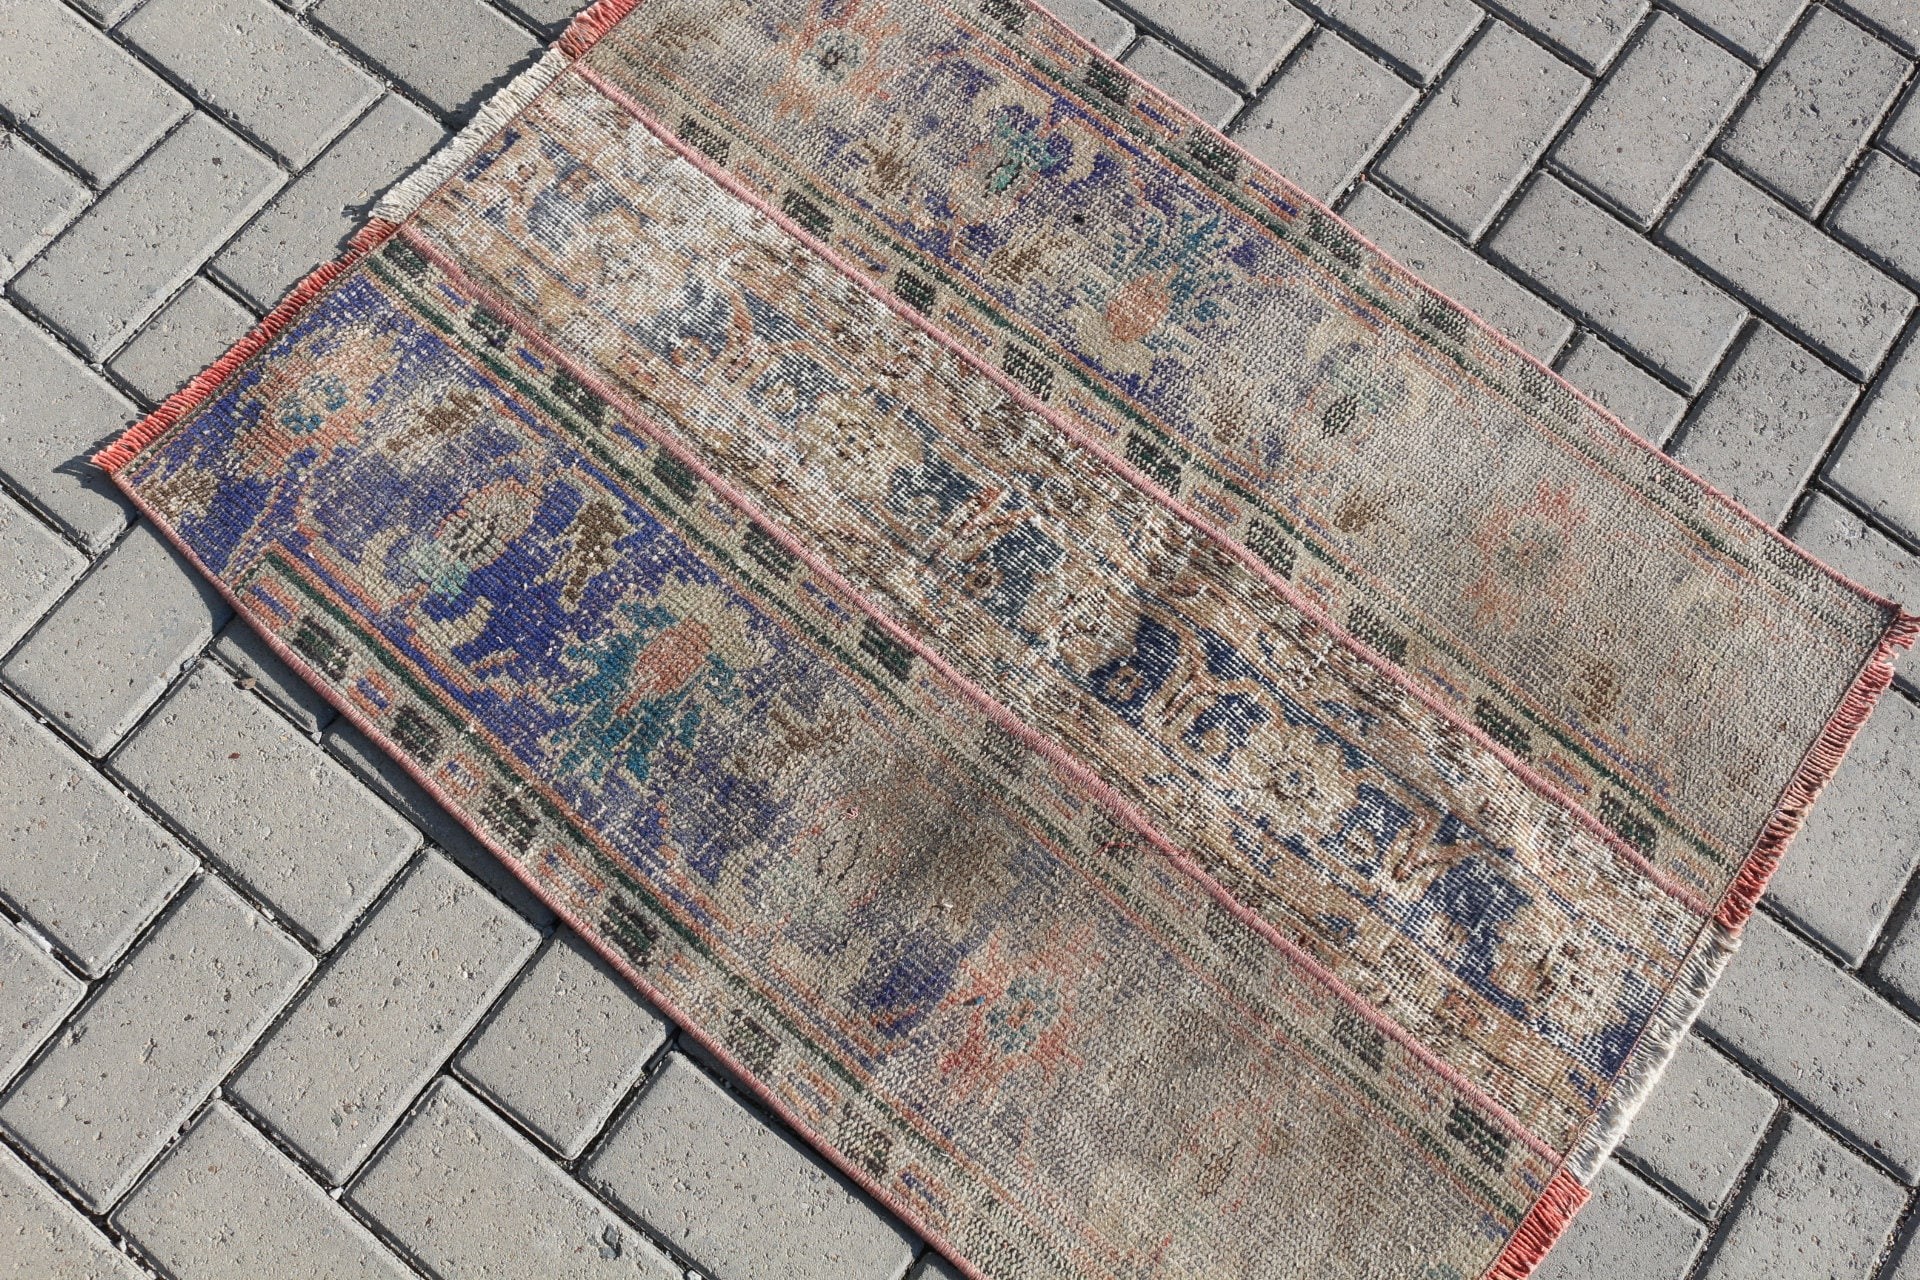 2.5x3.4 ft Small Rug, Entry Rug, Car Mat Rugs, Blue Home Decor Rug, Rugs for Entry, Vintage Rug, Moroccan Rug, Turkish Rugs, Floor Rug